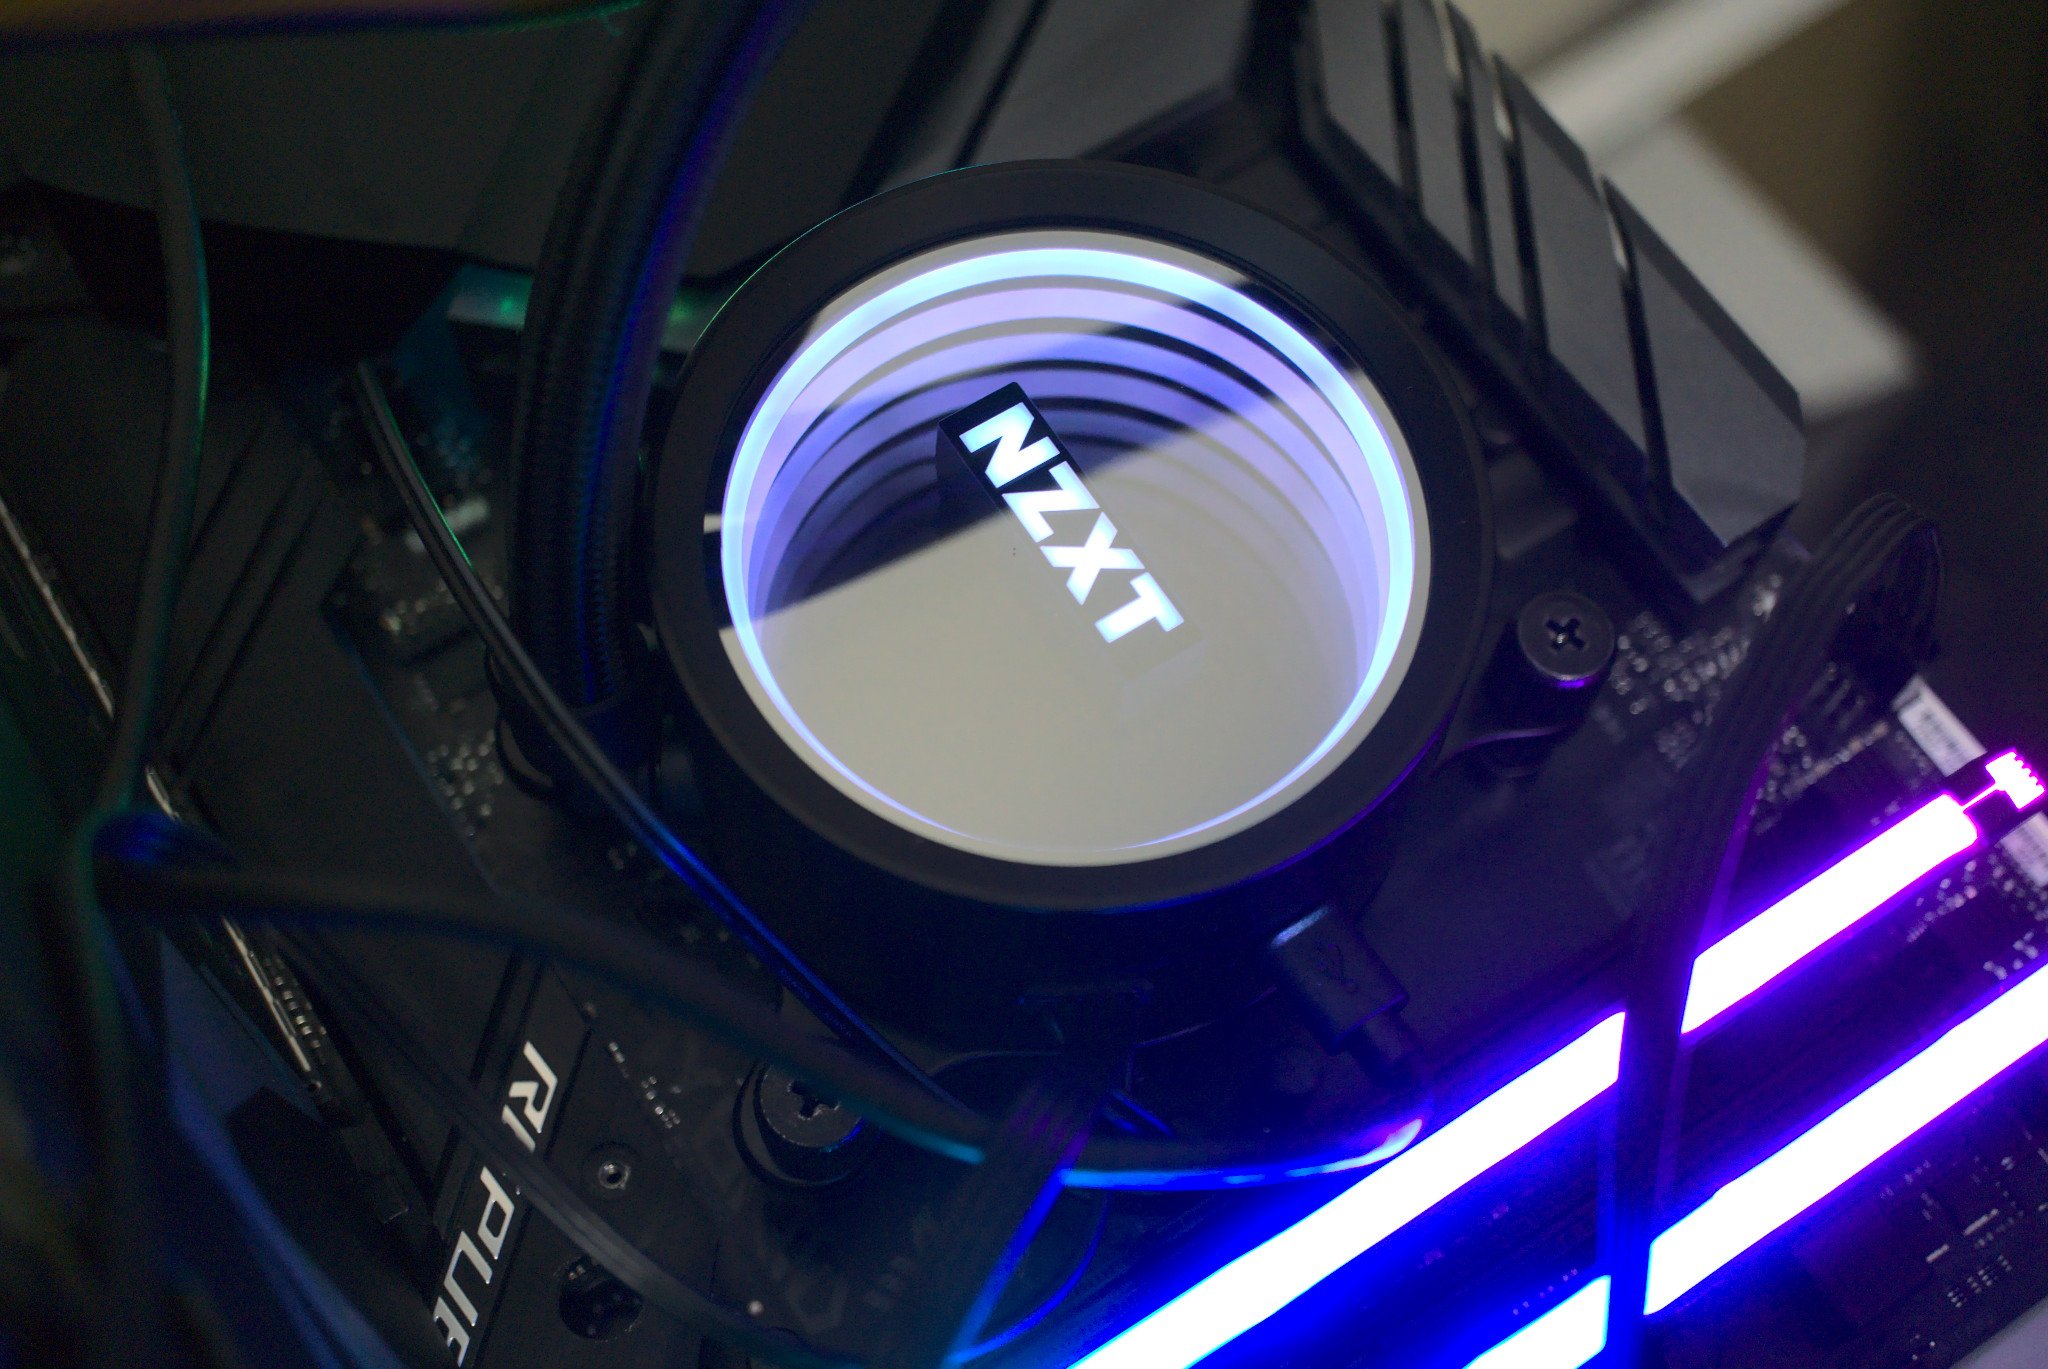 NZXT Kraken X73 RGB AIO review: Exceptional cooling performance